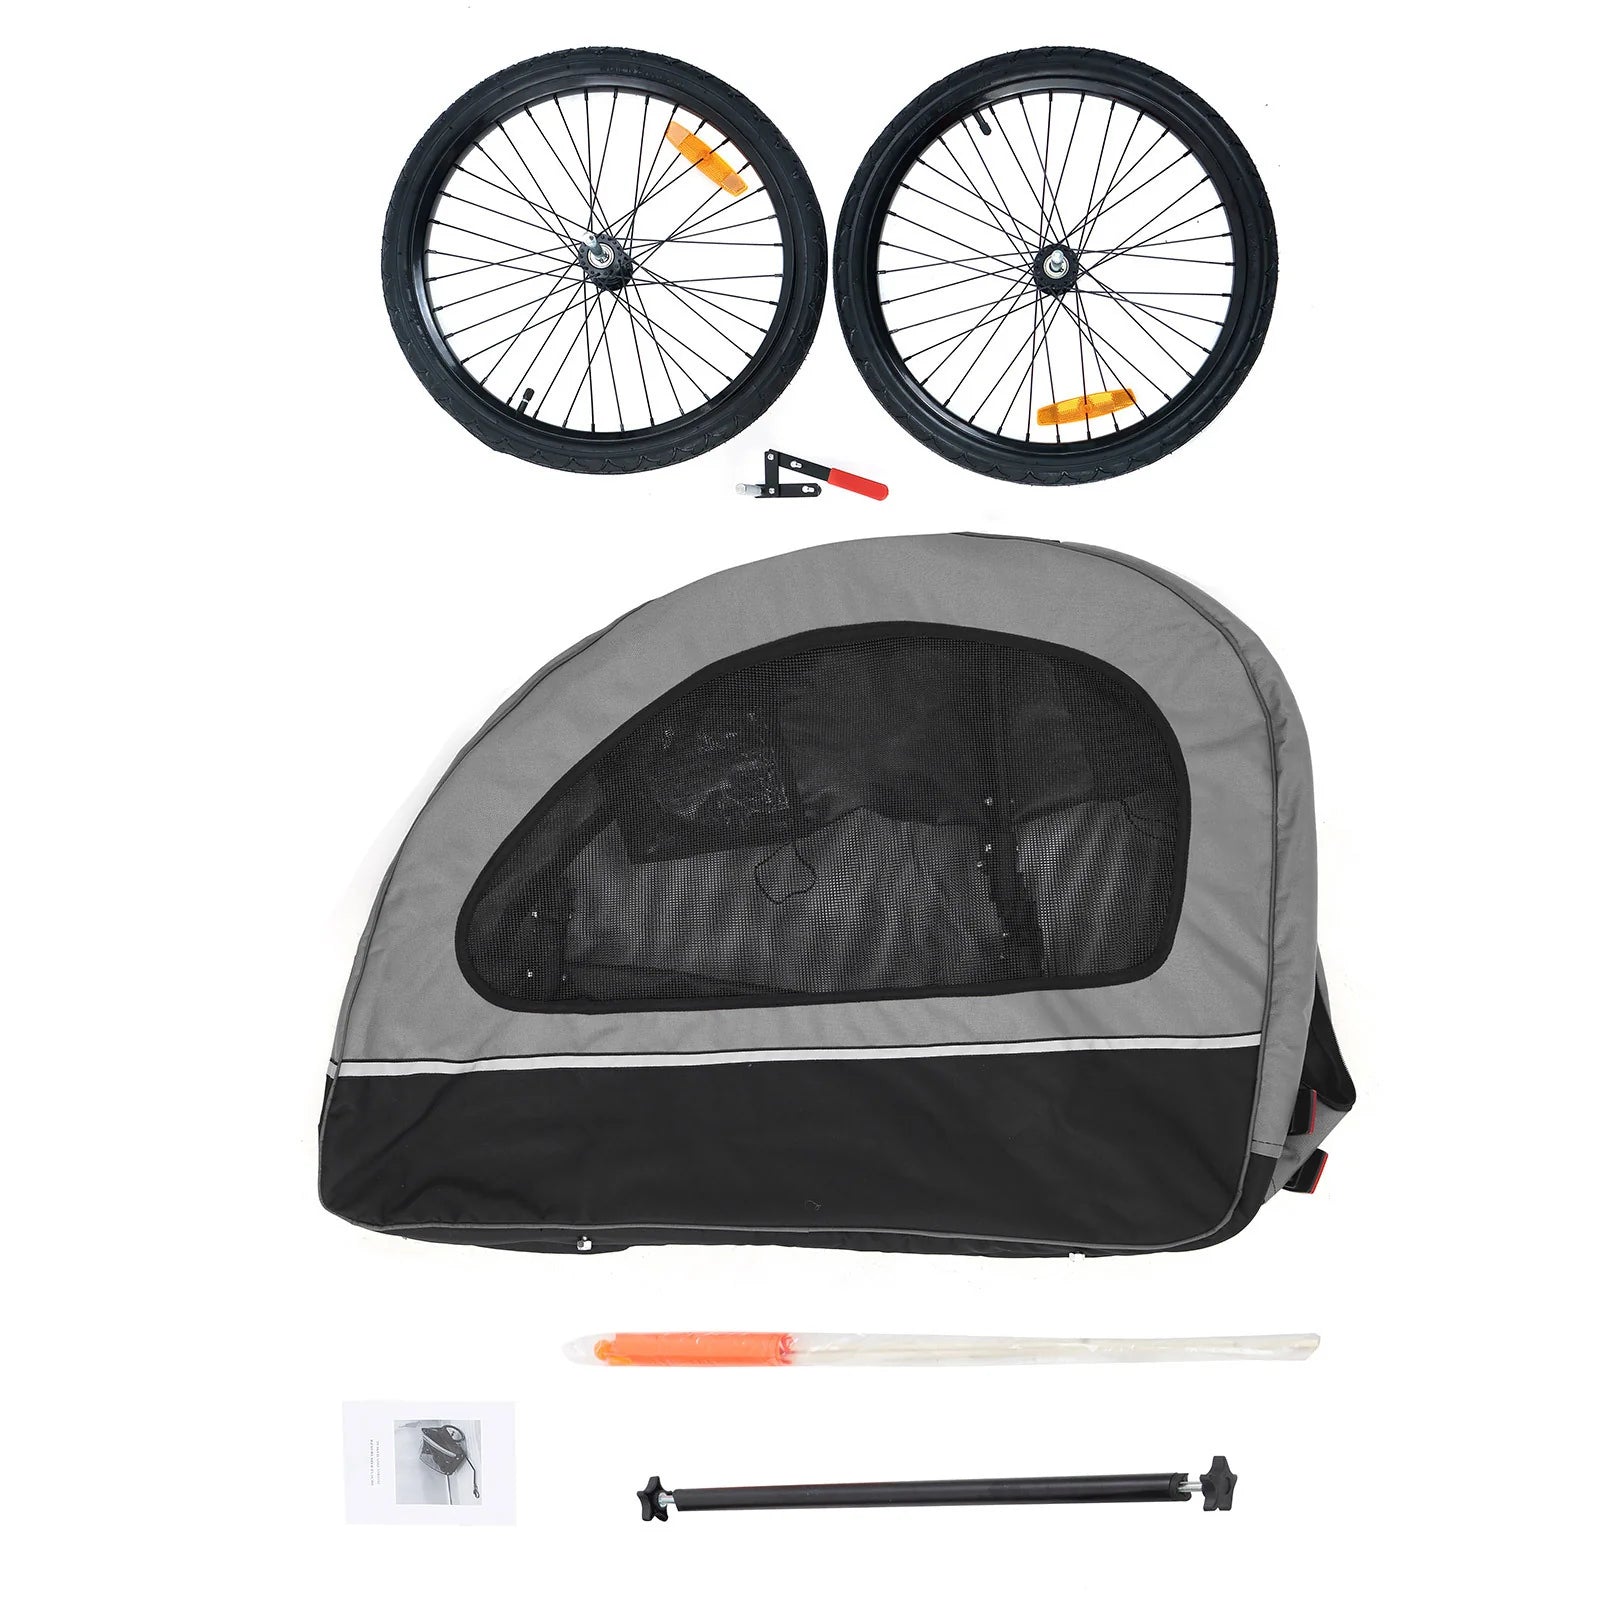 Dog Trailer, Dog Buggy, Bicycle Trailer Medium Foldable for Small and Medium Dogs - Shaggy Chic